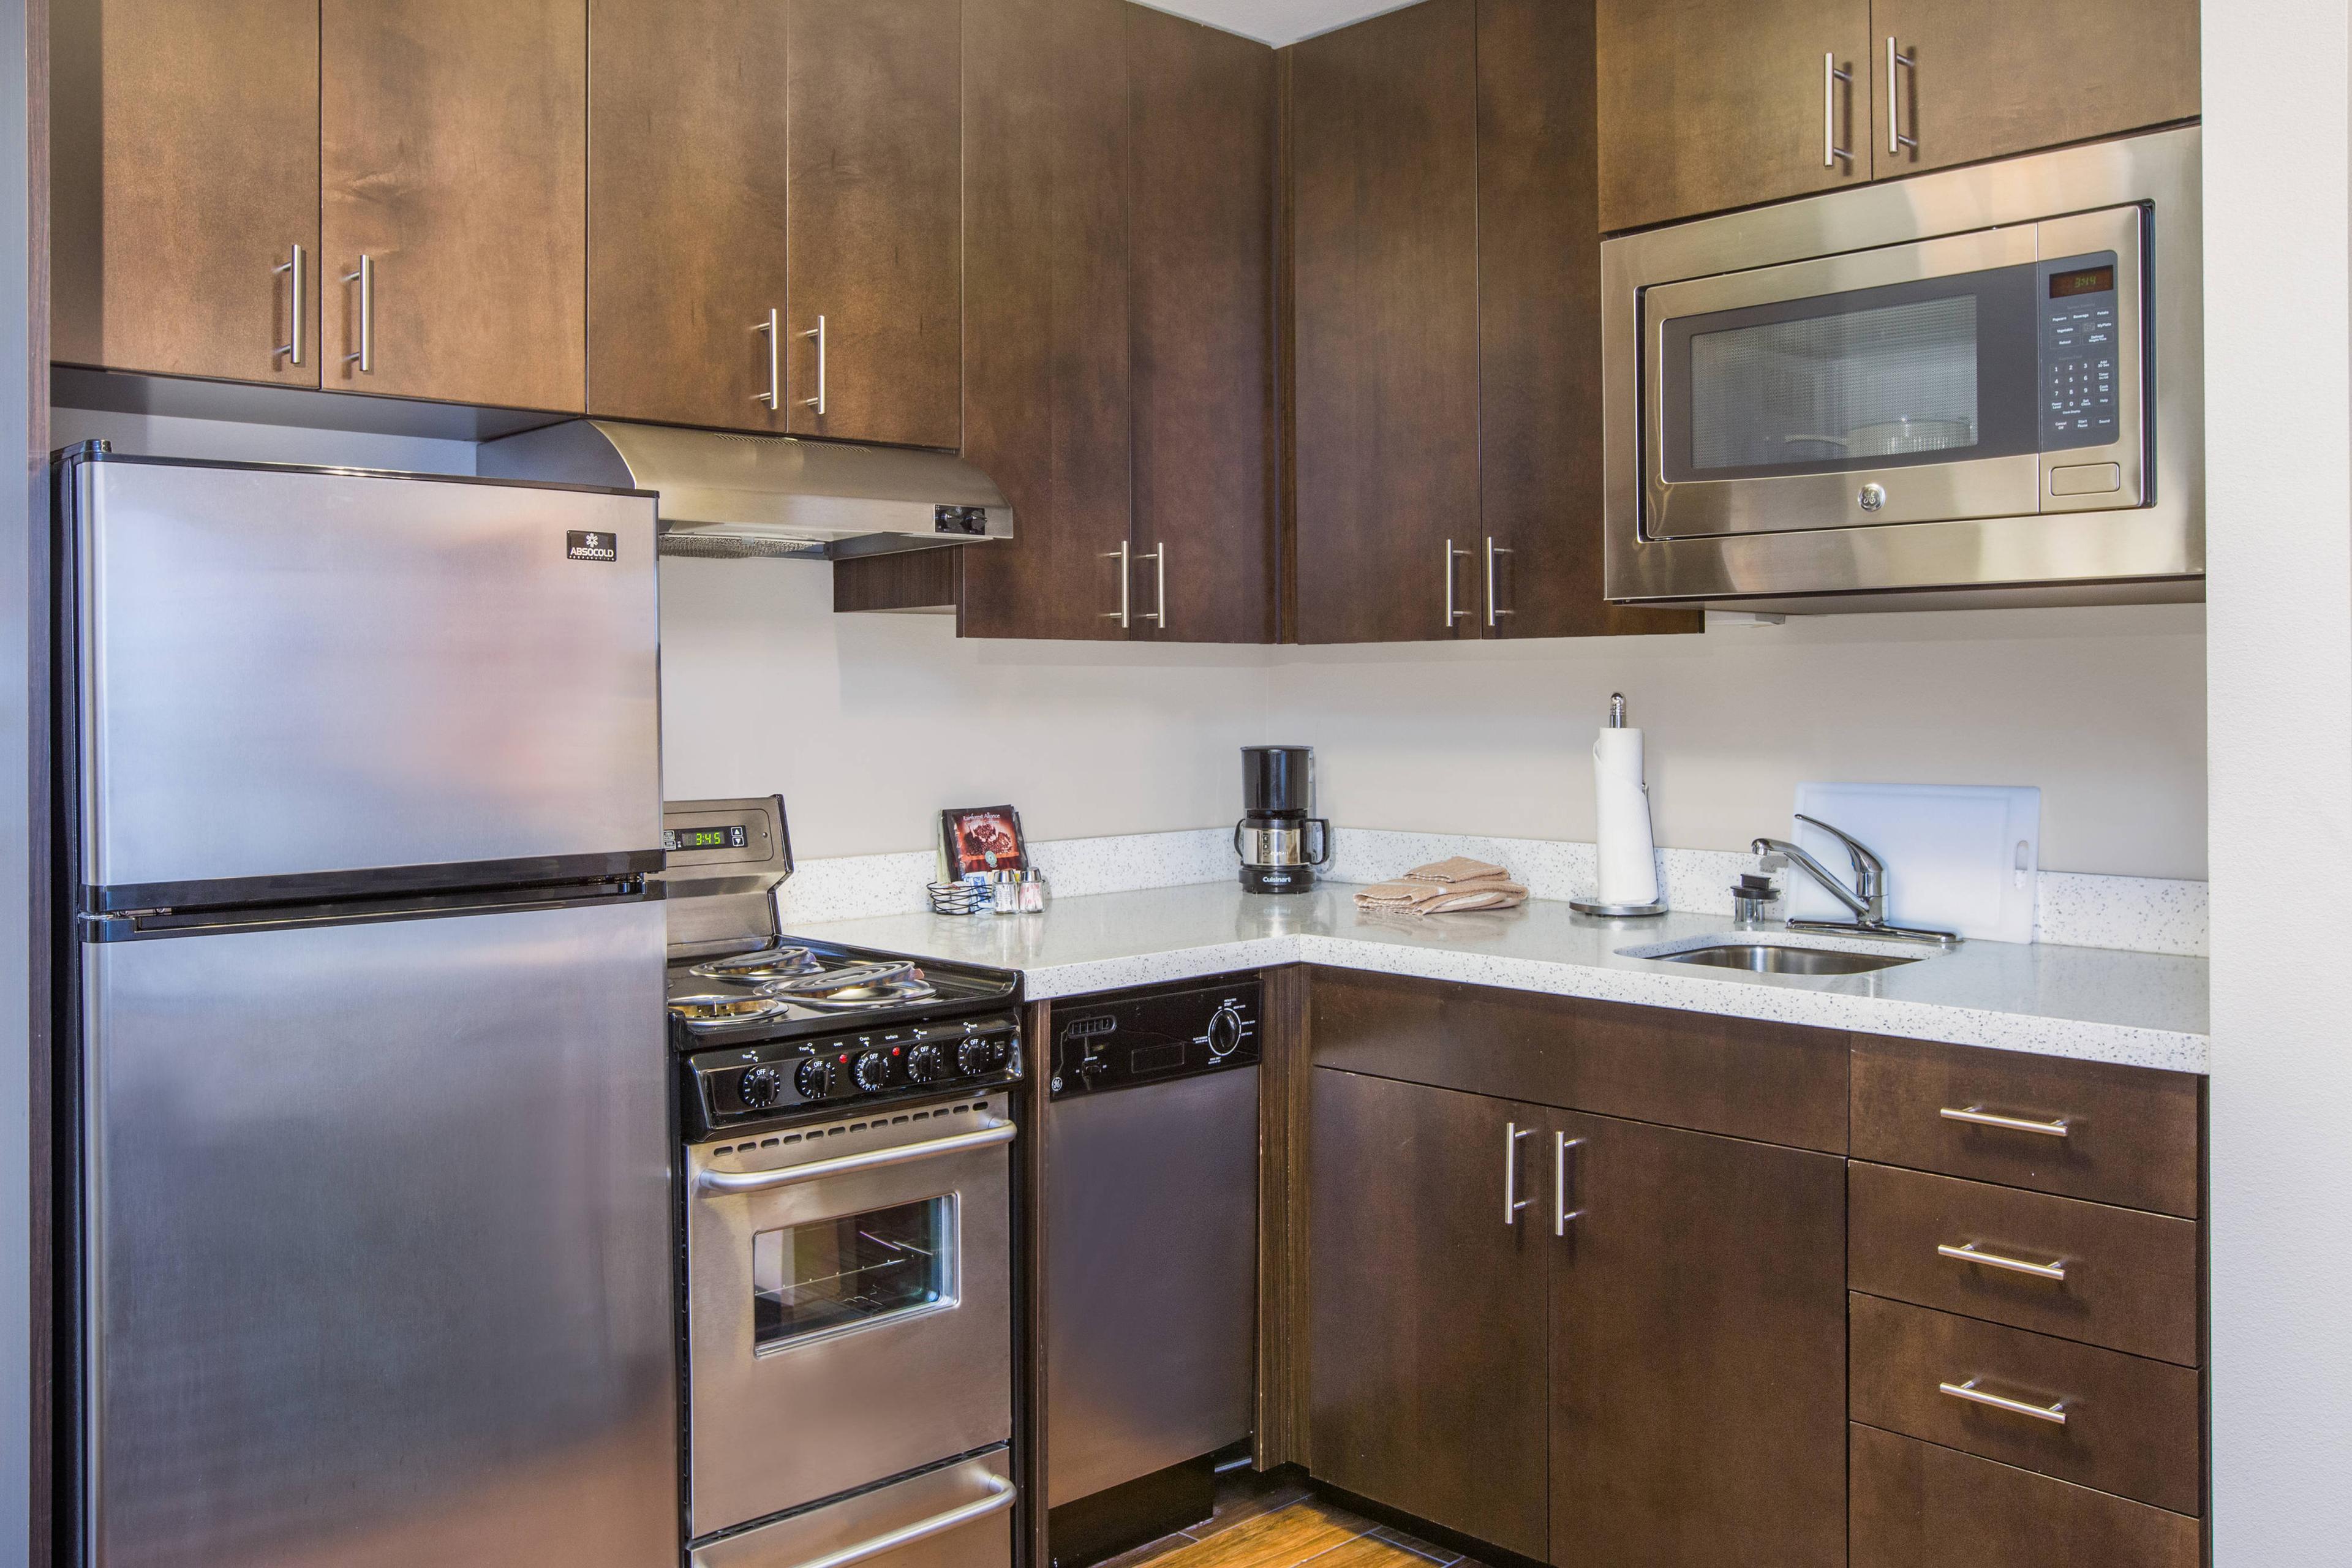 Our suites feature fully equipped kitchens with modern appliances.